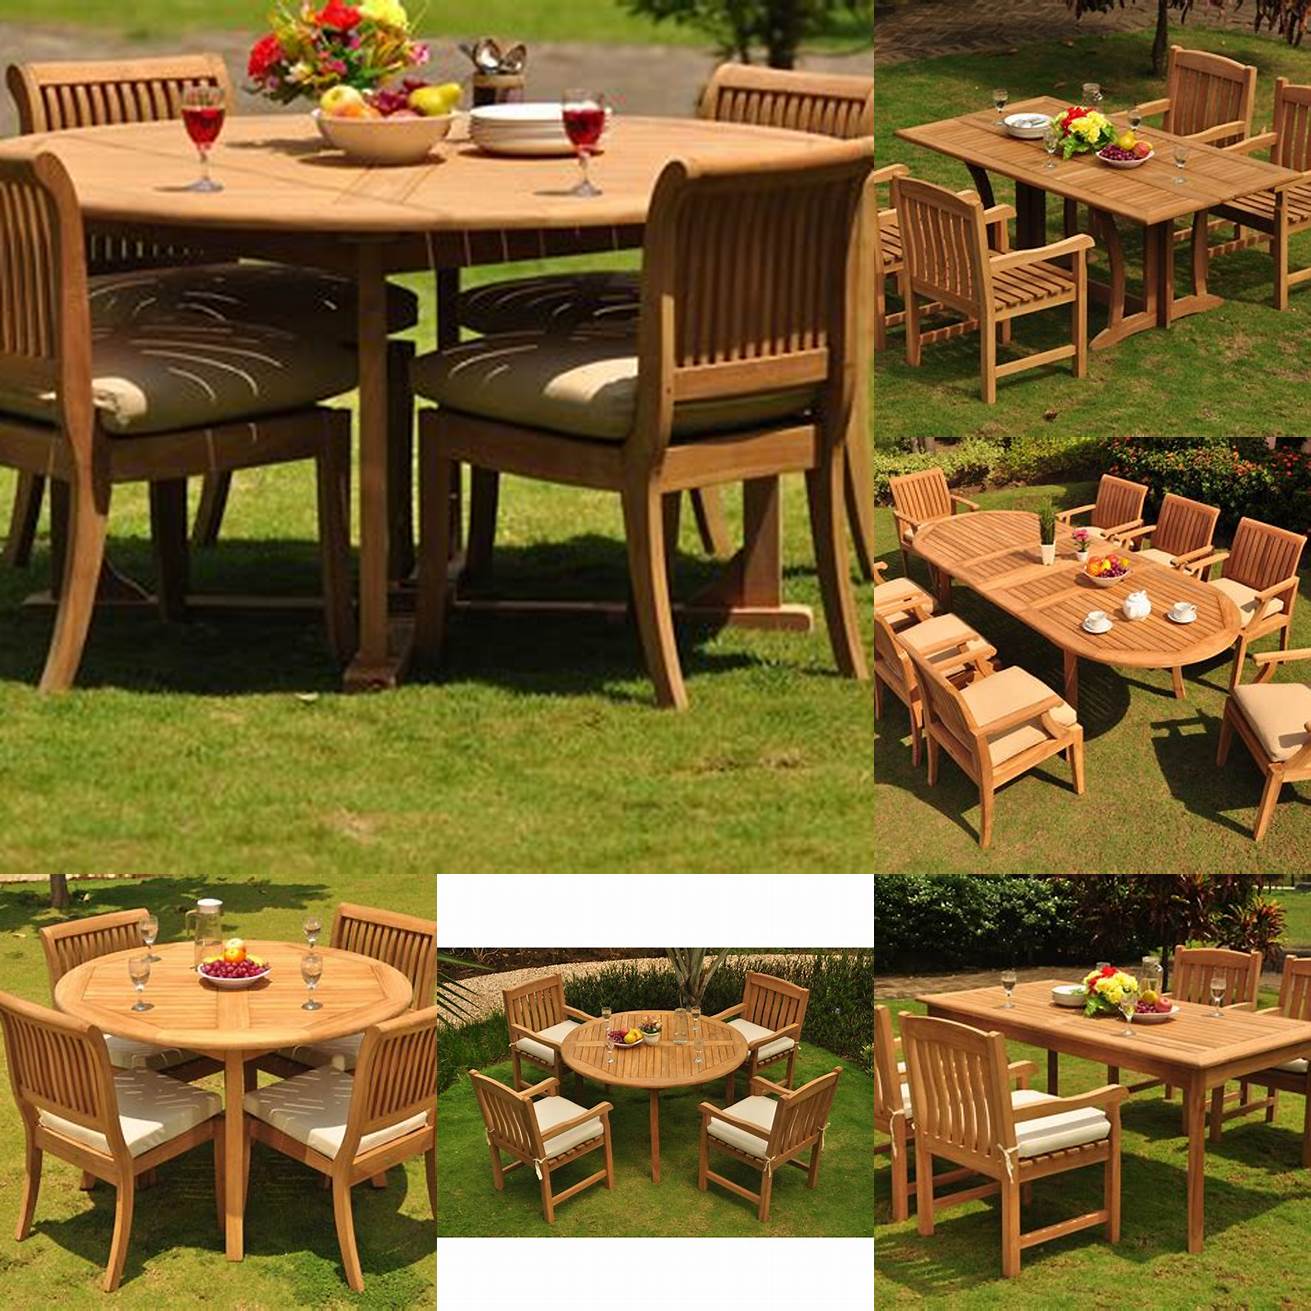 Teak Patio Tables and Chairs